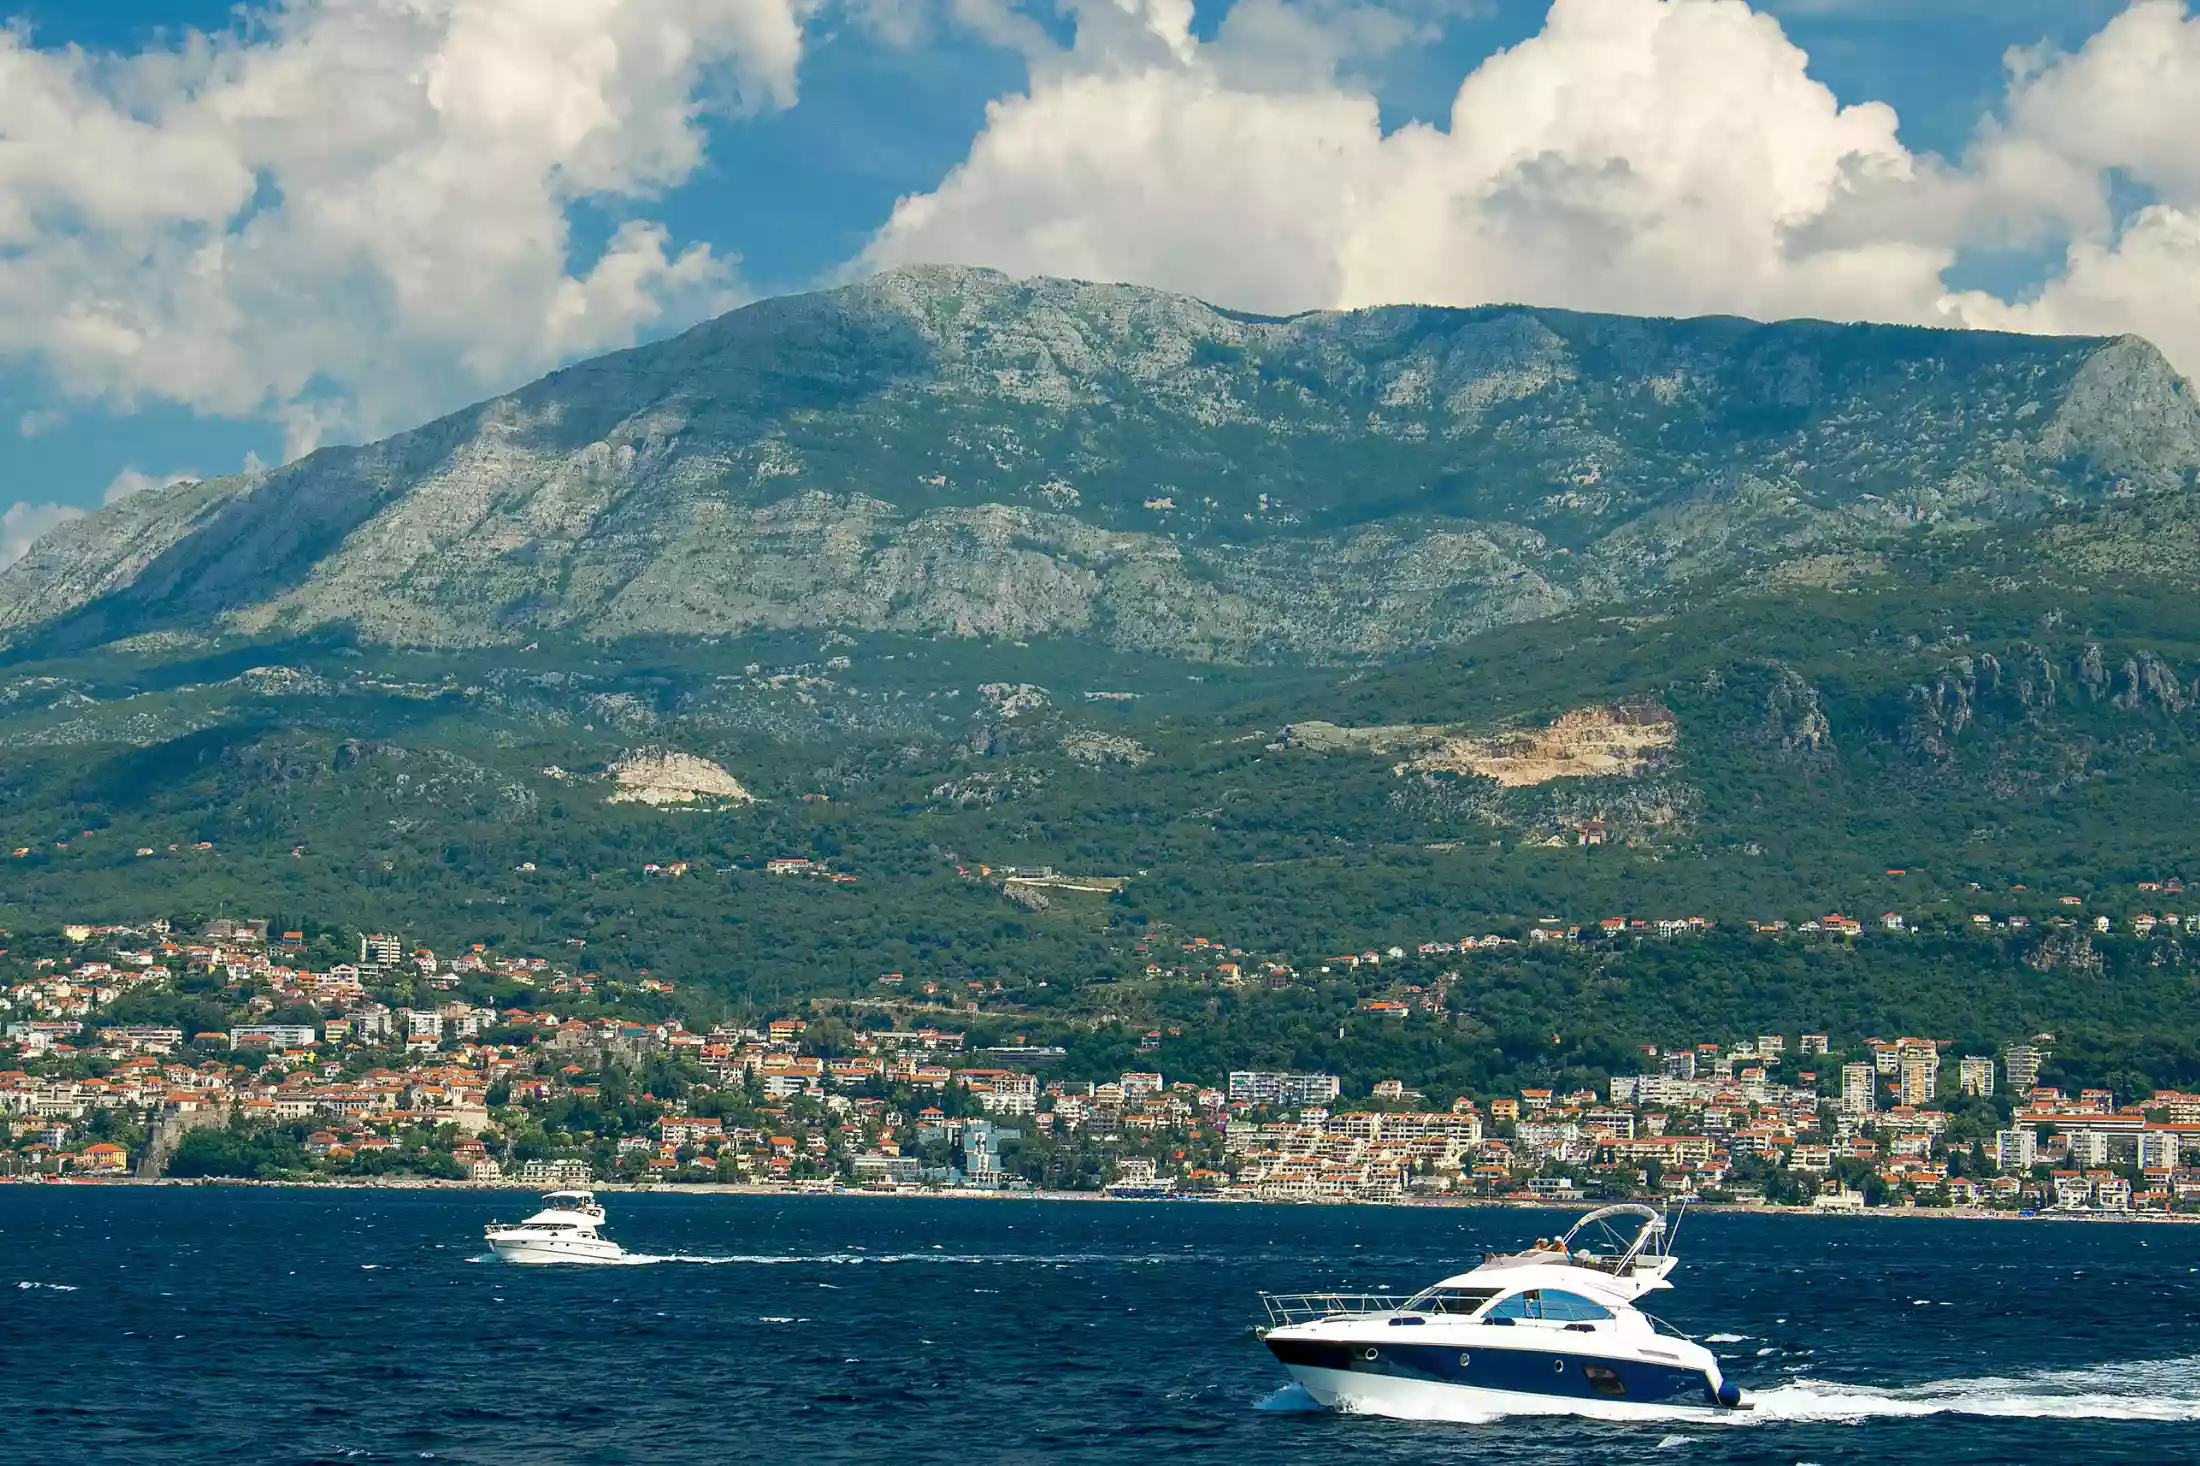 : The sparkling Adriatic Sea and quaint Herceg Novi town cradled at the foot of the towering Mount Orjen.